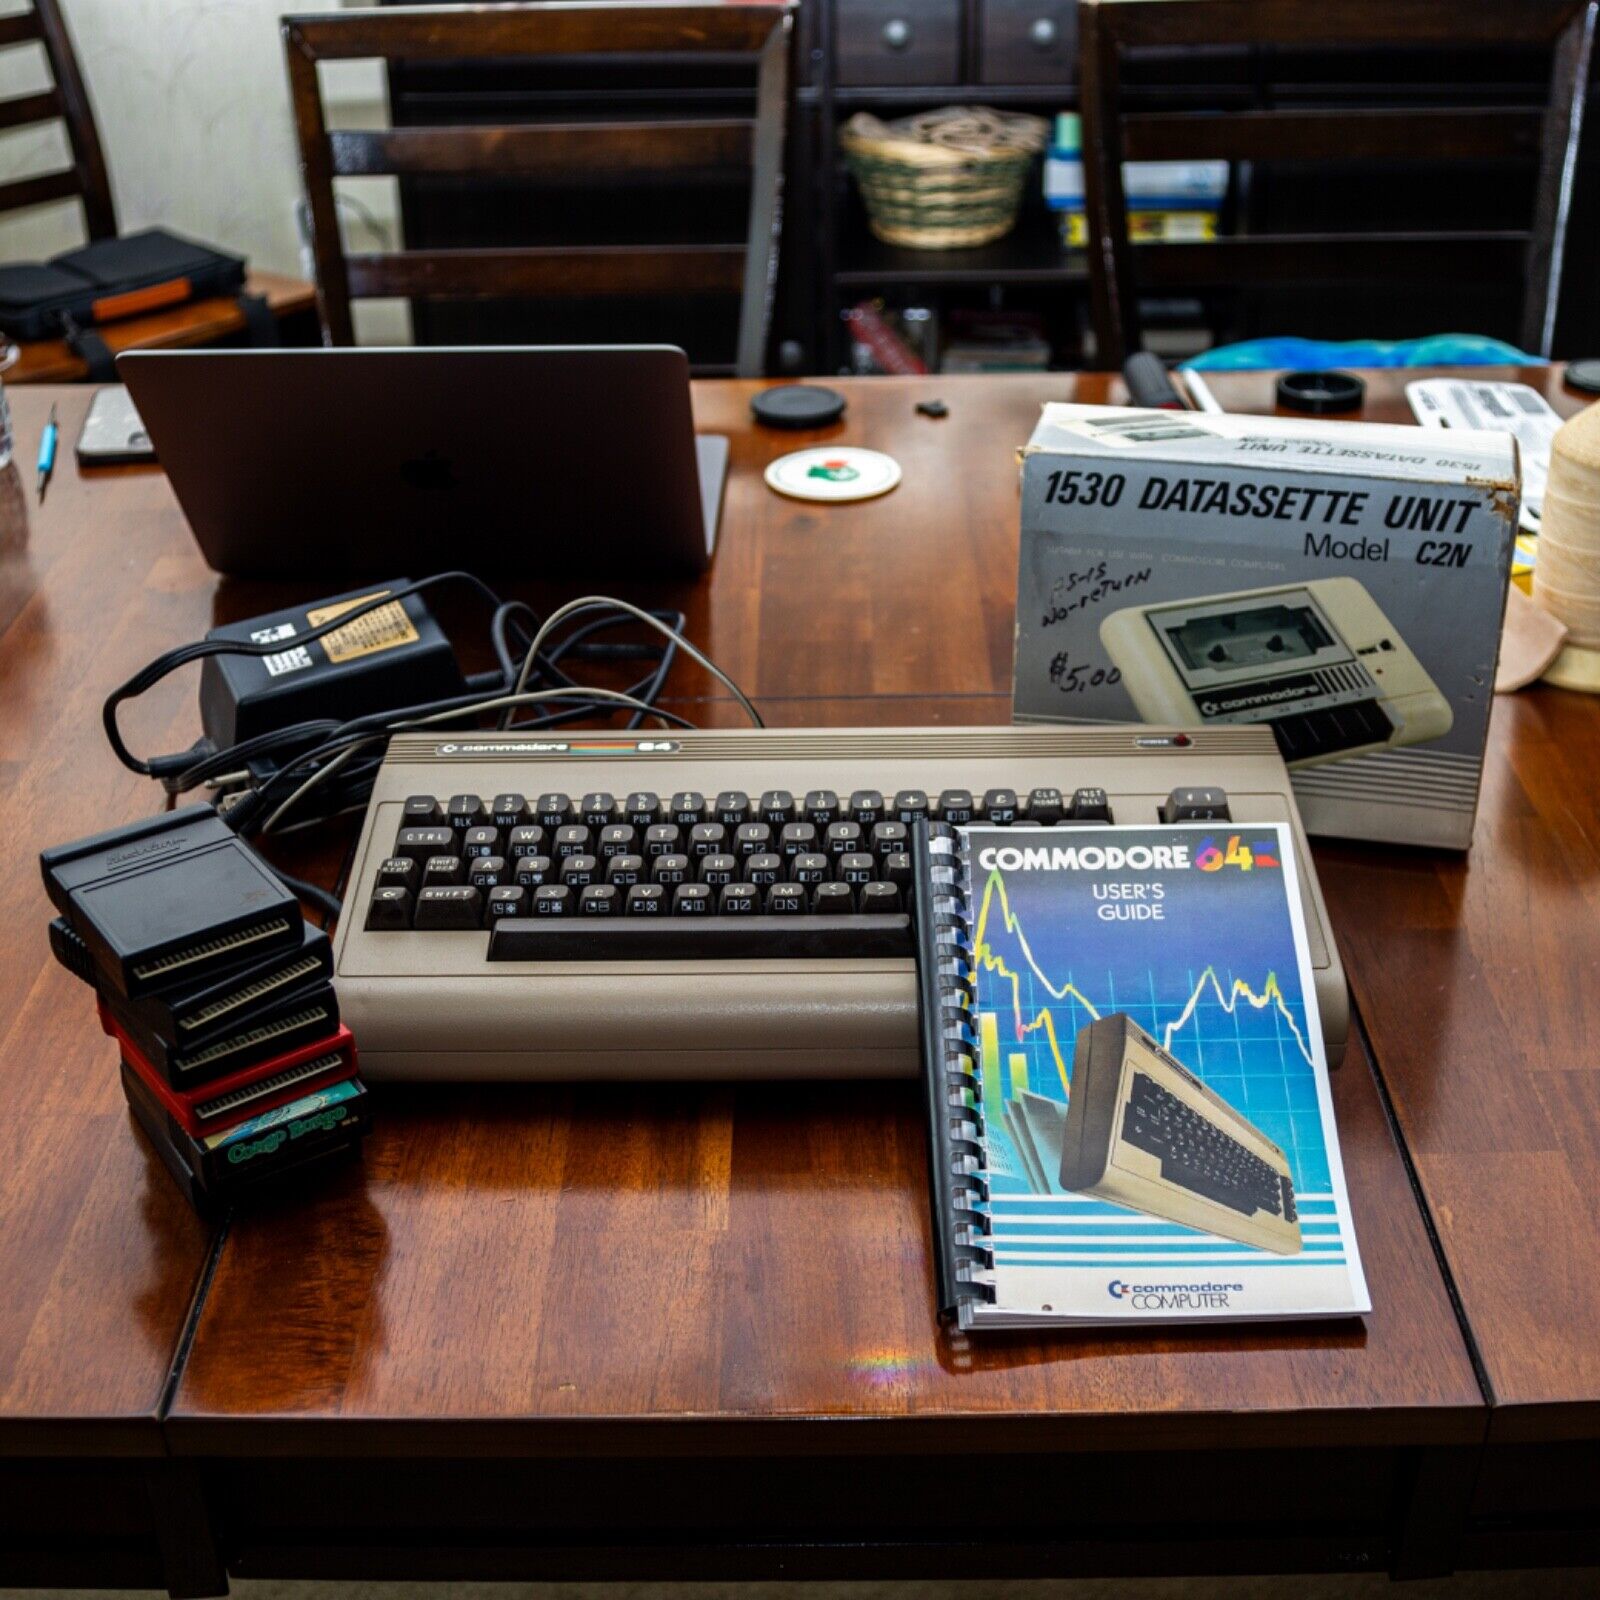 Commodore 64 Computer System with C2N 1530 Datasette and Game Cartridges - WORKS